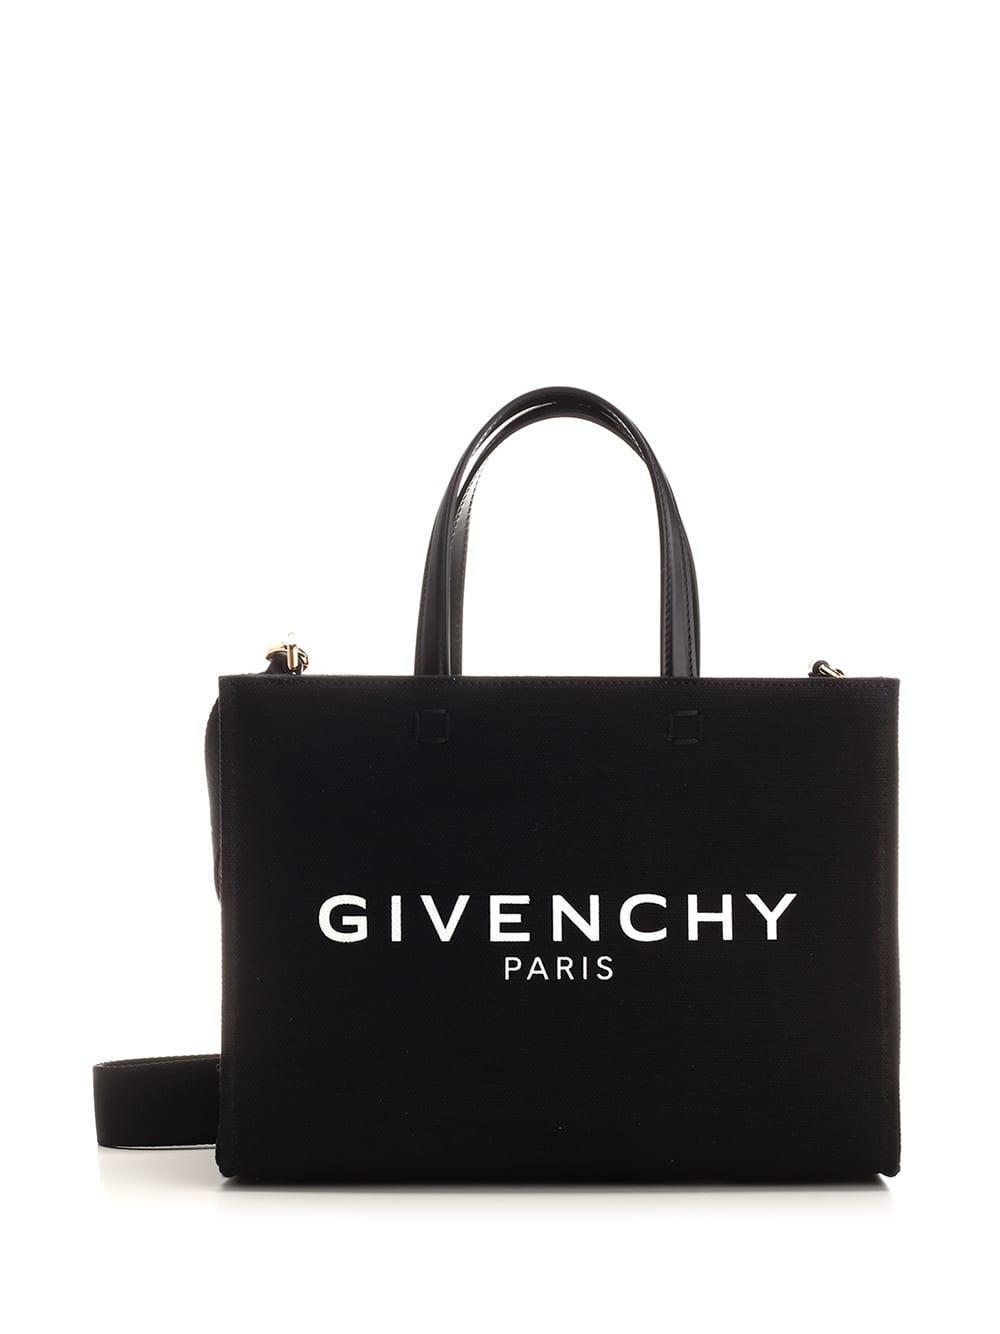 Givenchy G-tote Small Canvas Shopper in Black